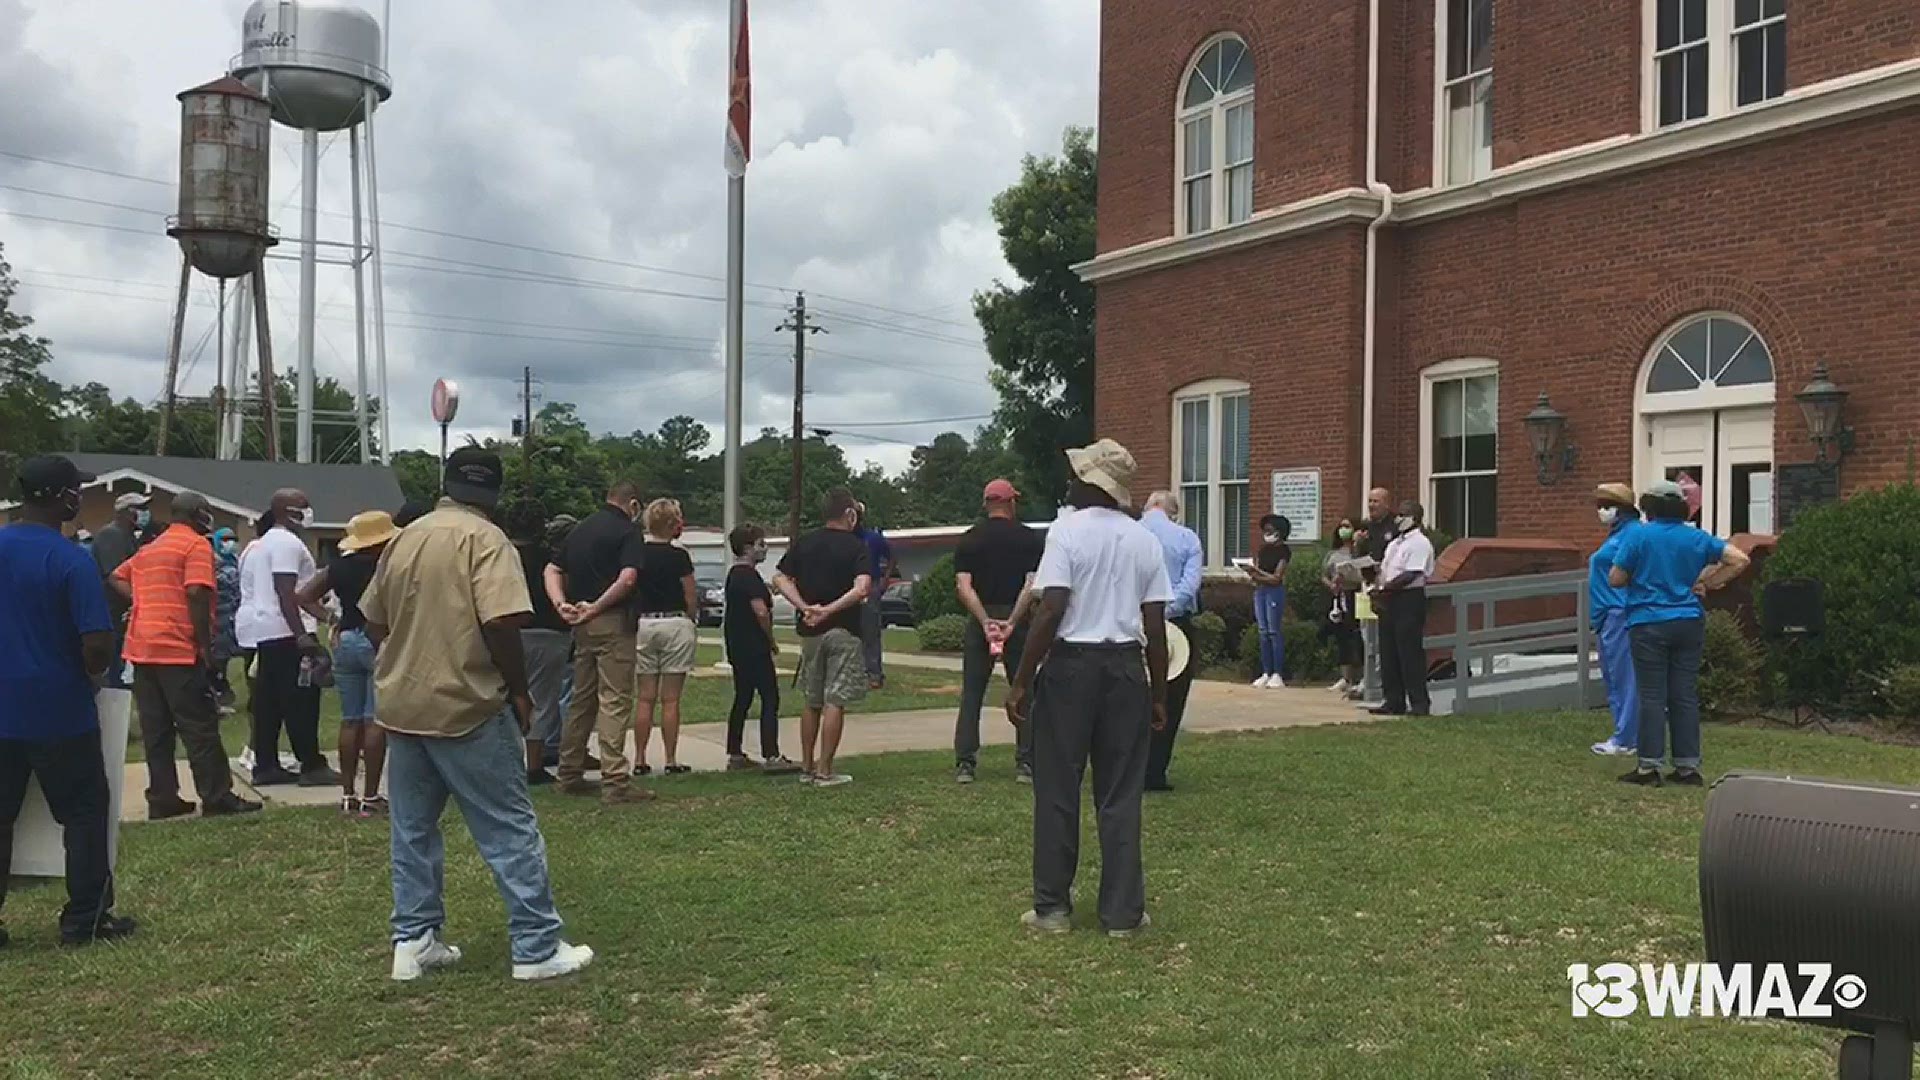 People gathered at the Twiggs County courthouse to peacefully protest.